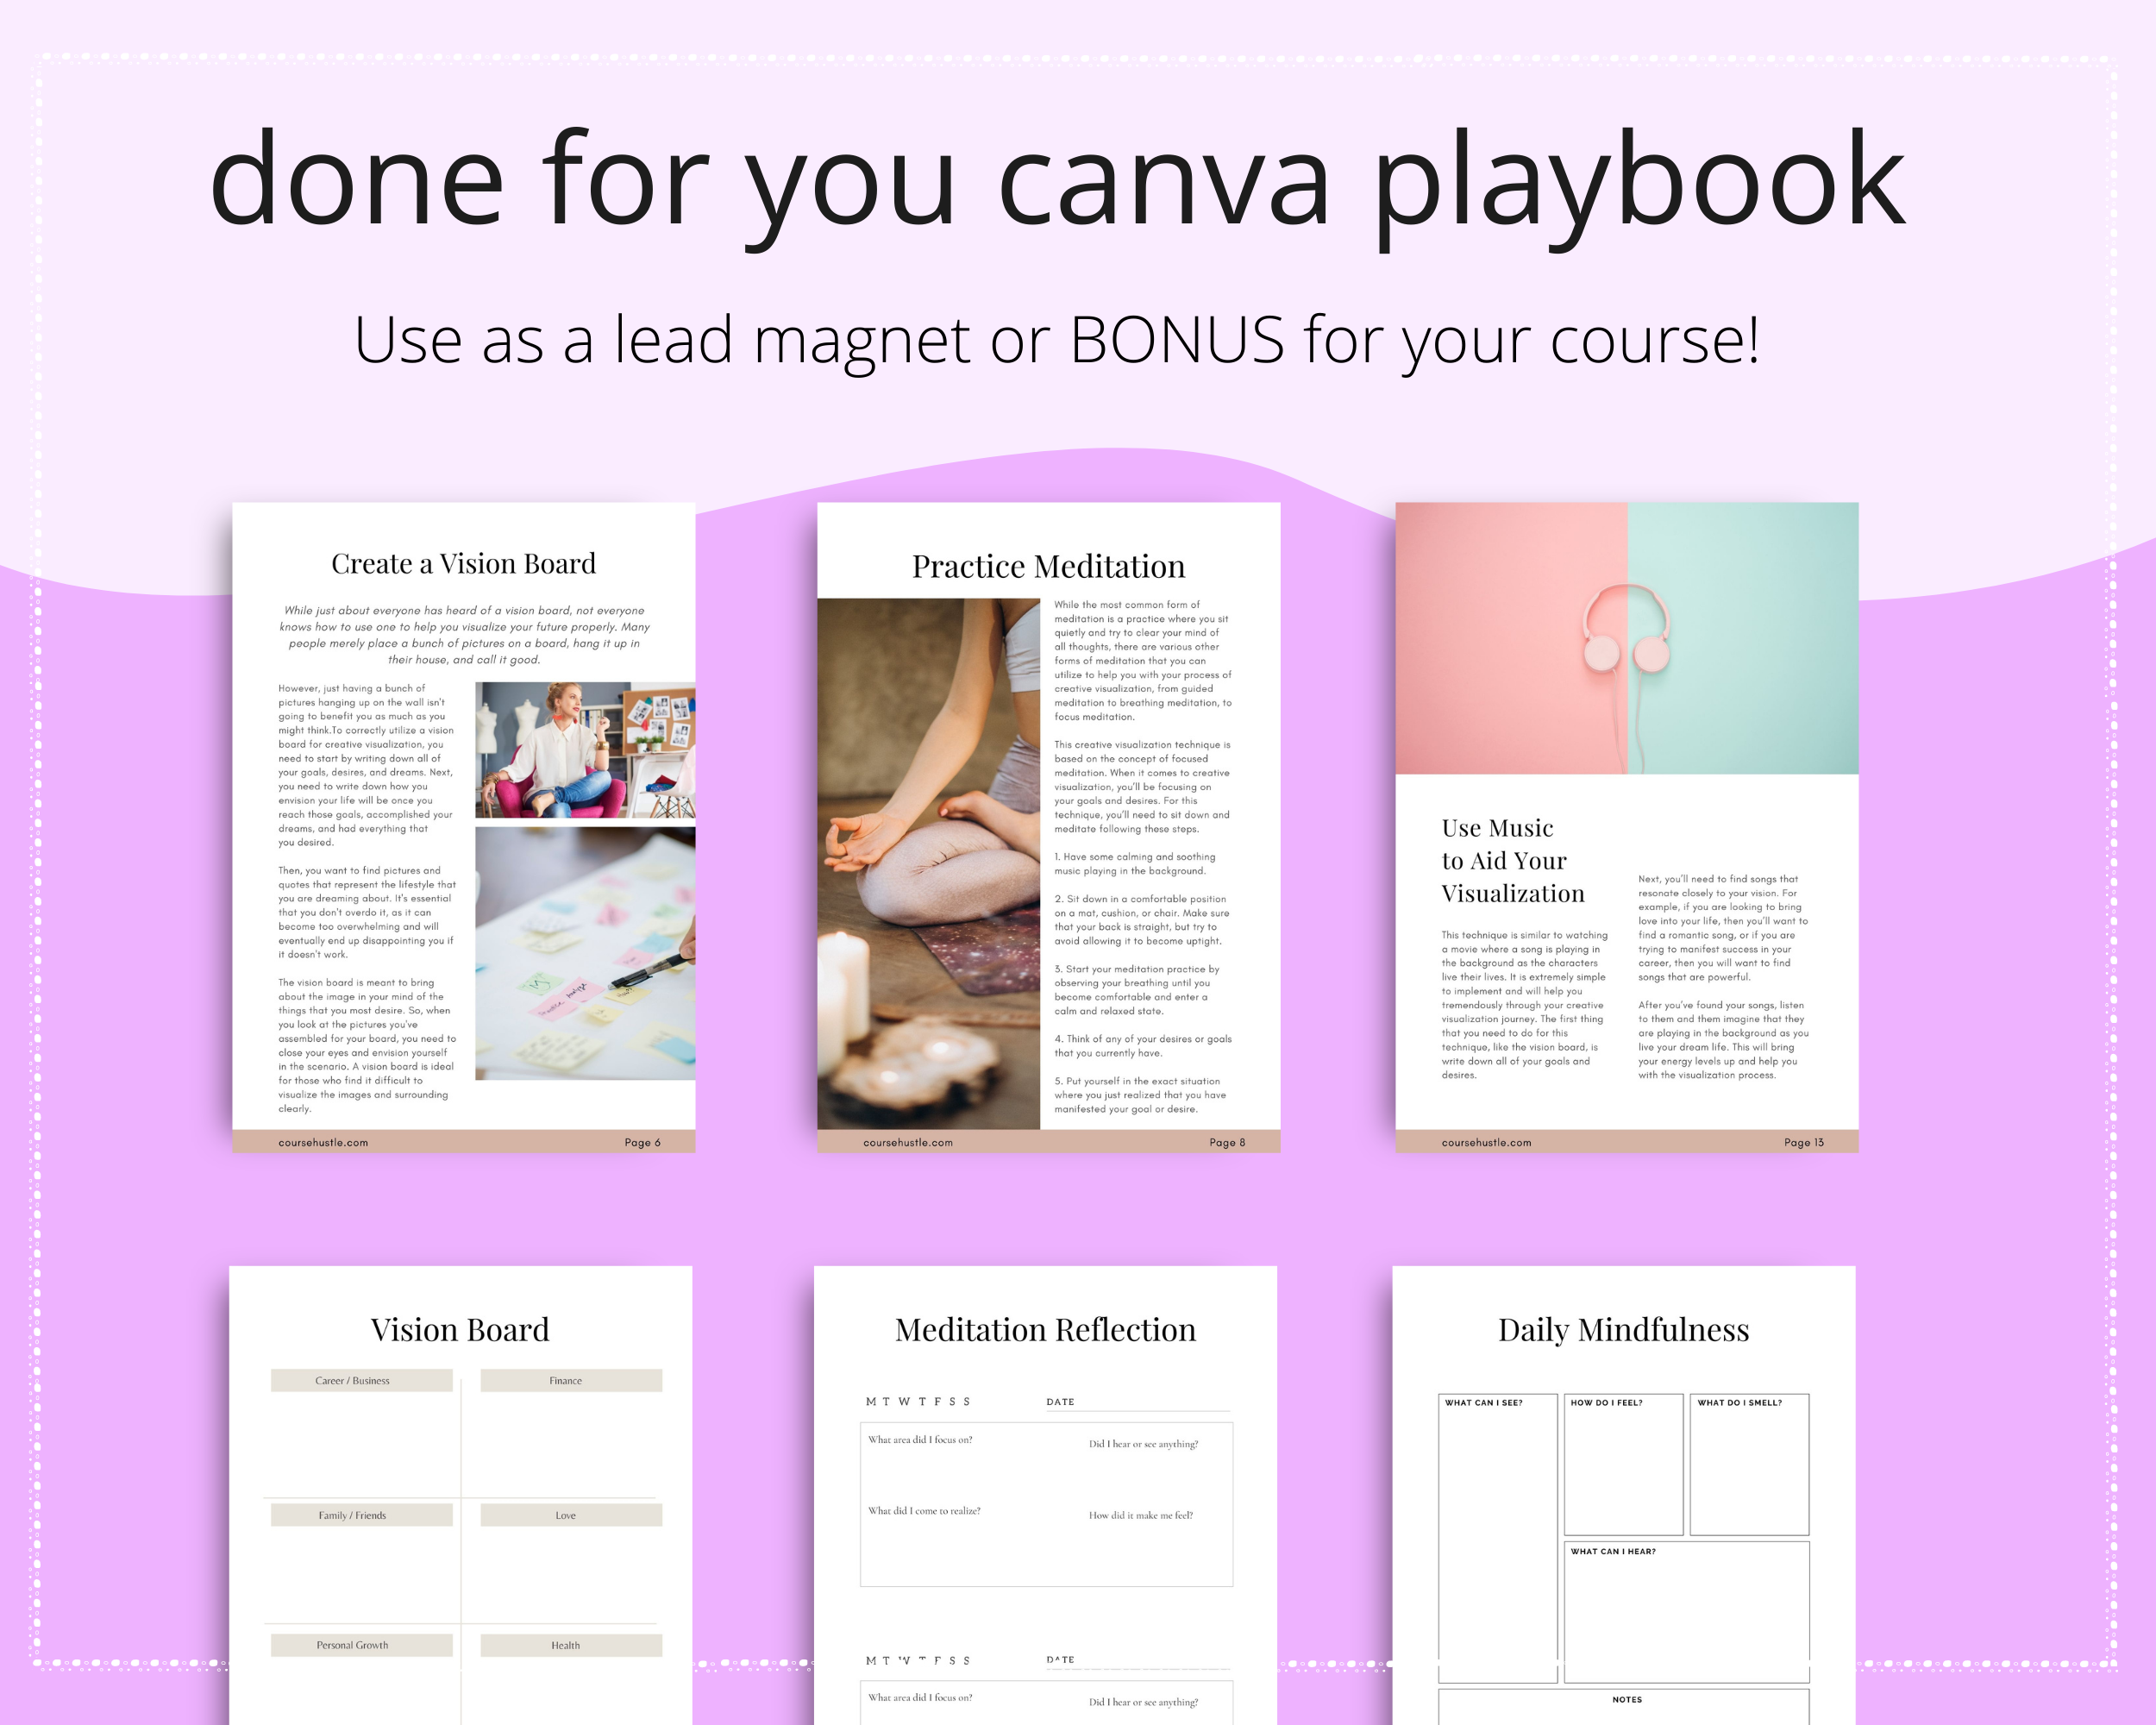 Done-for-You Visualization Techniques To Boost Your Success Playbook in Canva | Editable A4 Size Canva Template